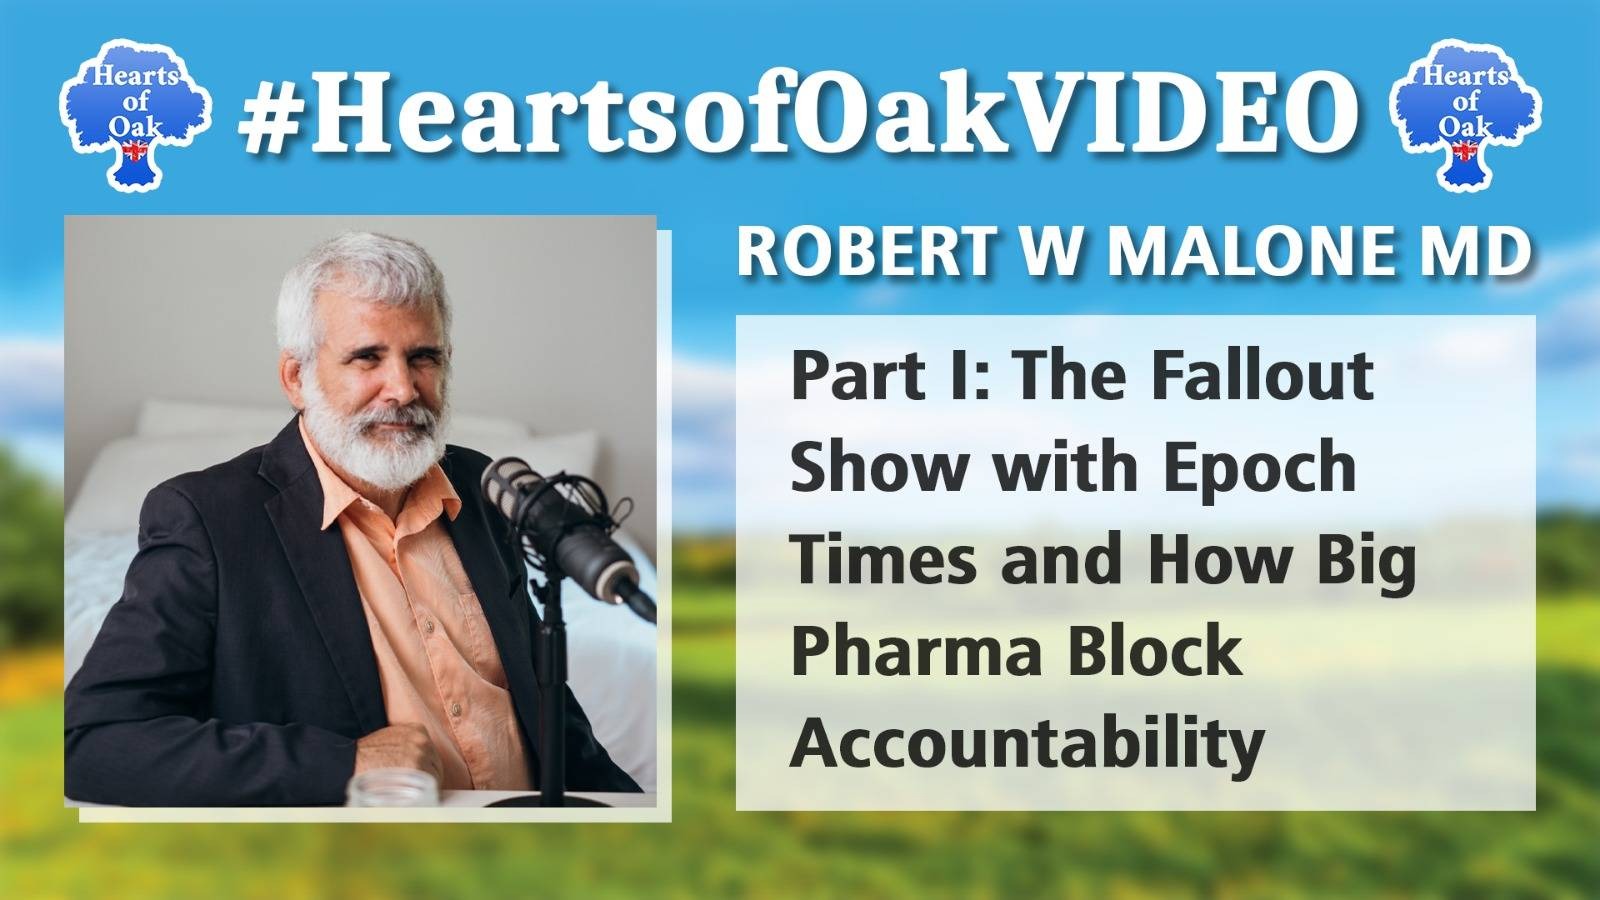 Robert W Malone MD: The Fallout Show with Epoch Times and How Big Pharma Block Accountability